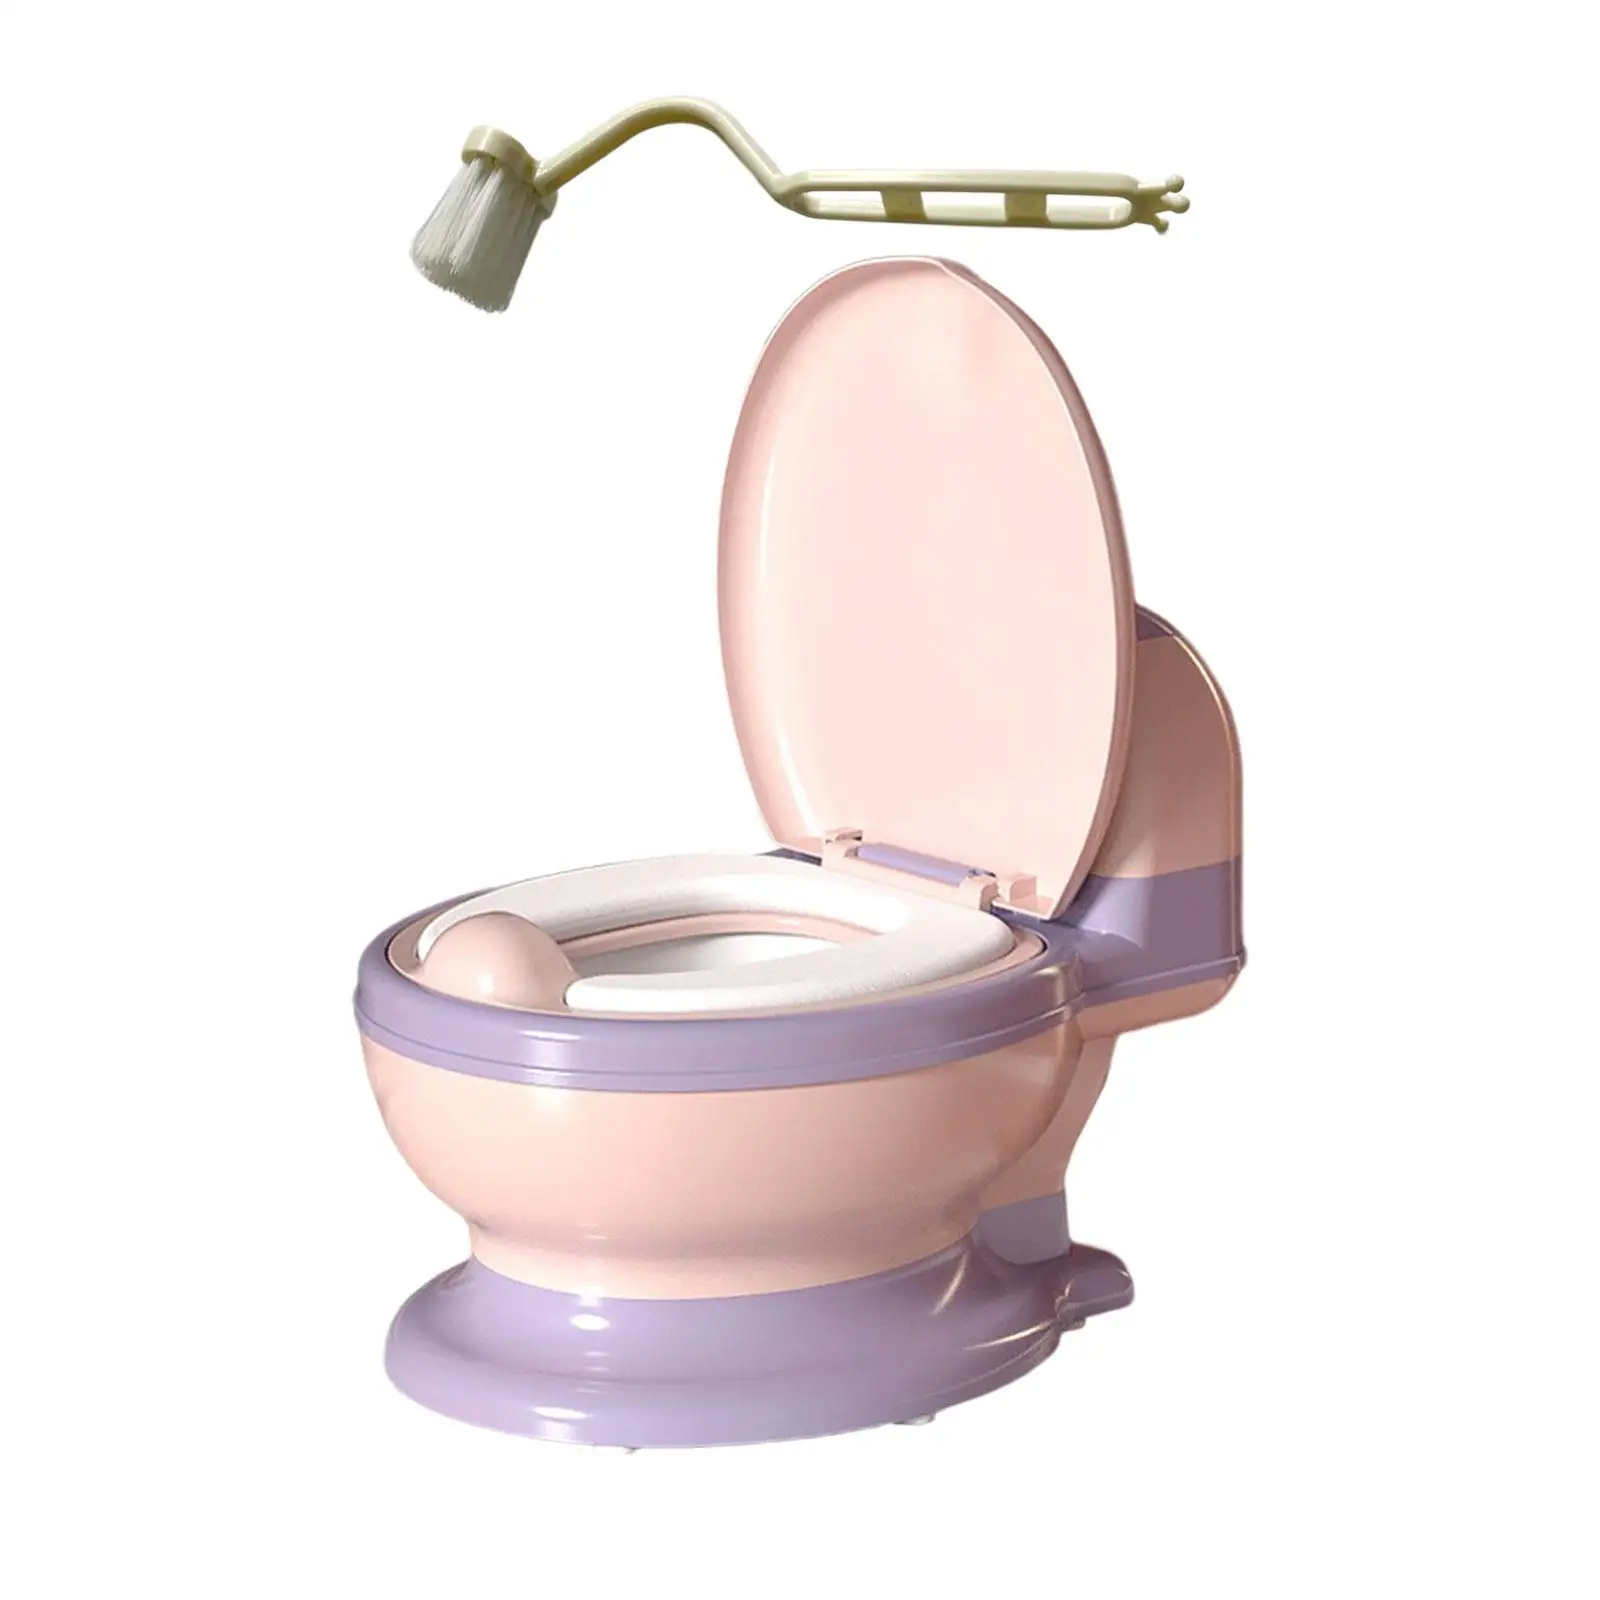 Toilet Training Potty Easy to Clean Compact Size Real Feel Potty Realistic Toilet Infants Toilet Seat Babies Girls Boys Ages 0-7